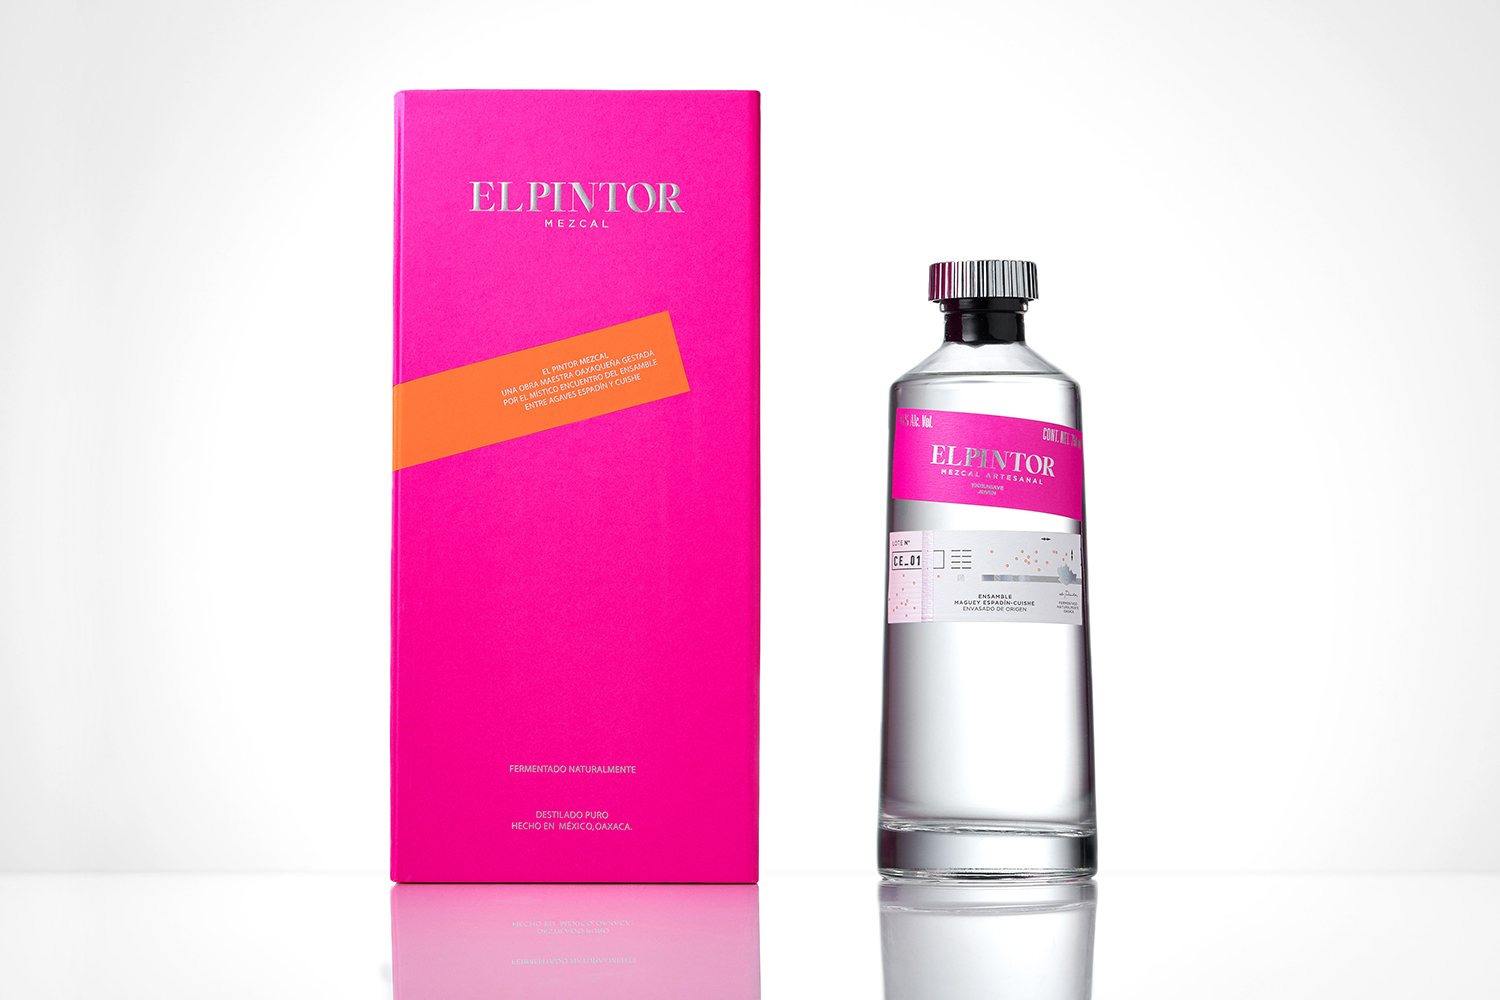 Graphic identity and packaging by Anagrama for mezcal and tequila brand El Pintor